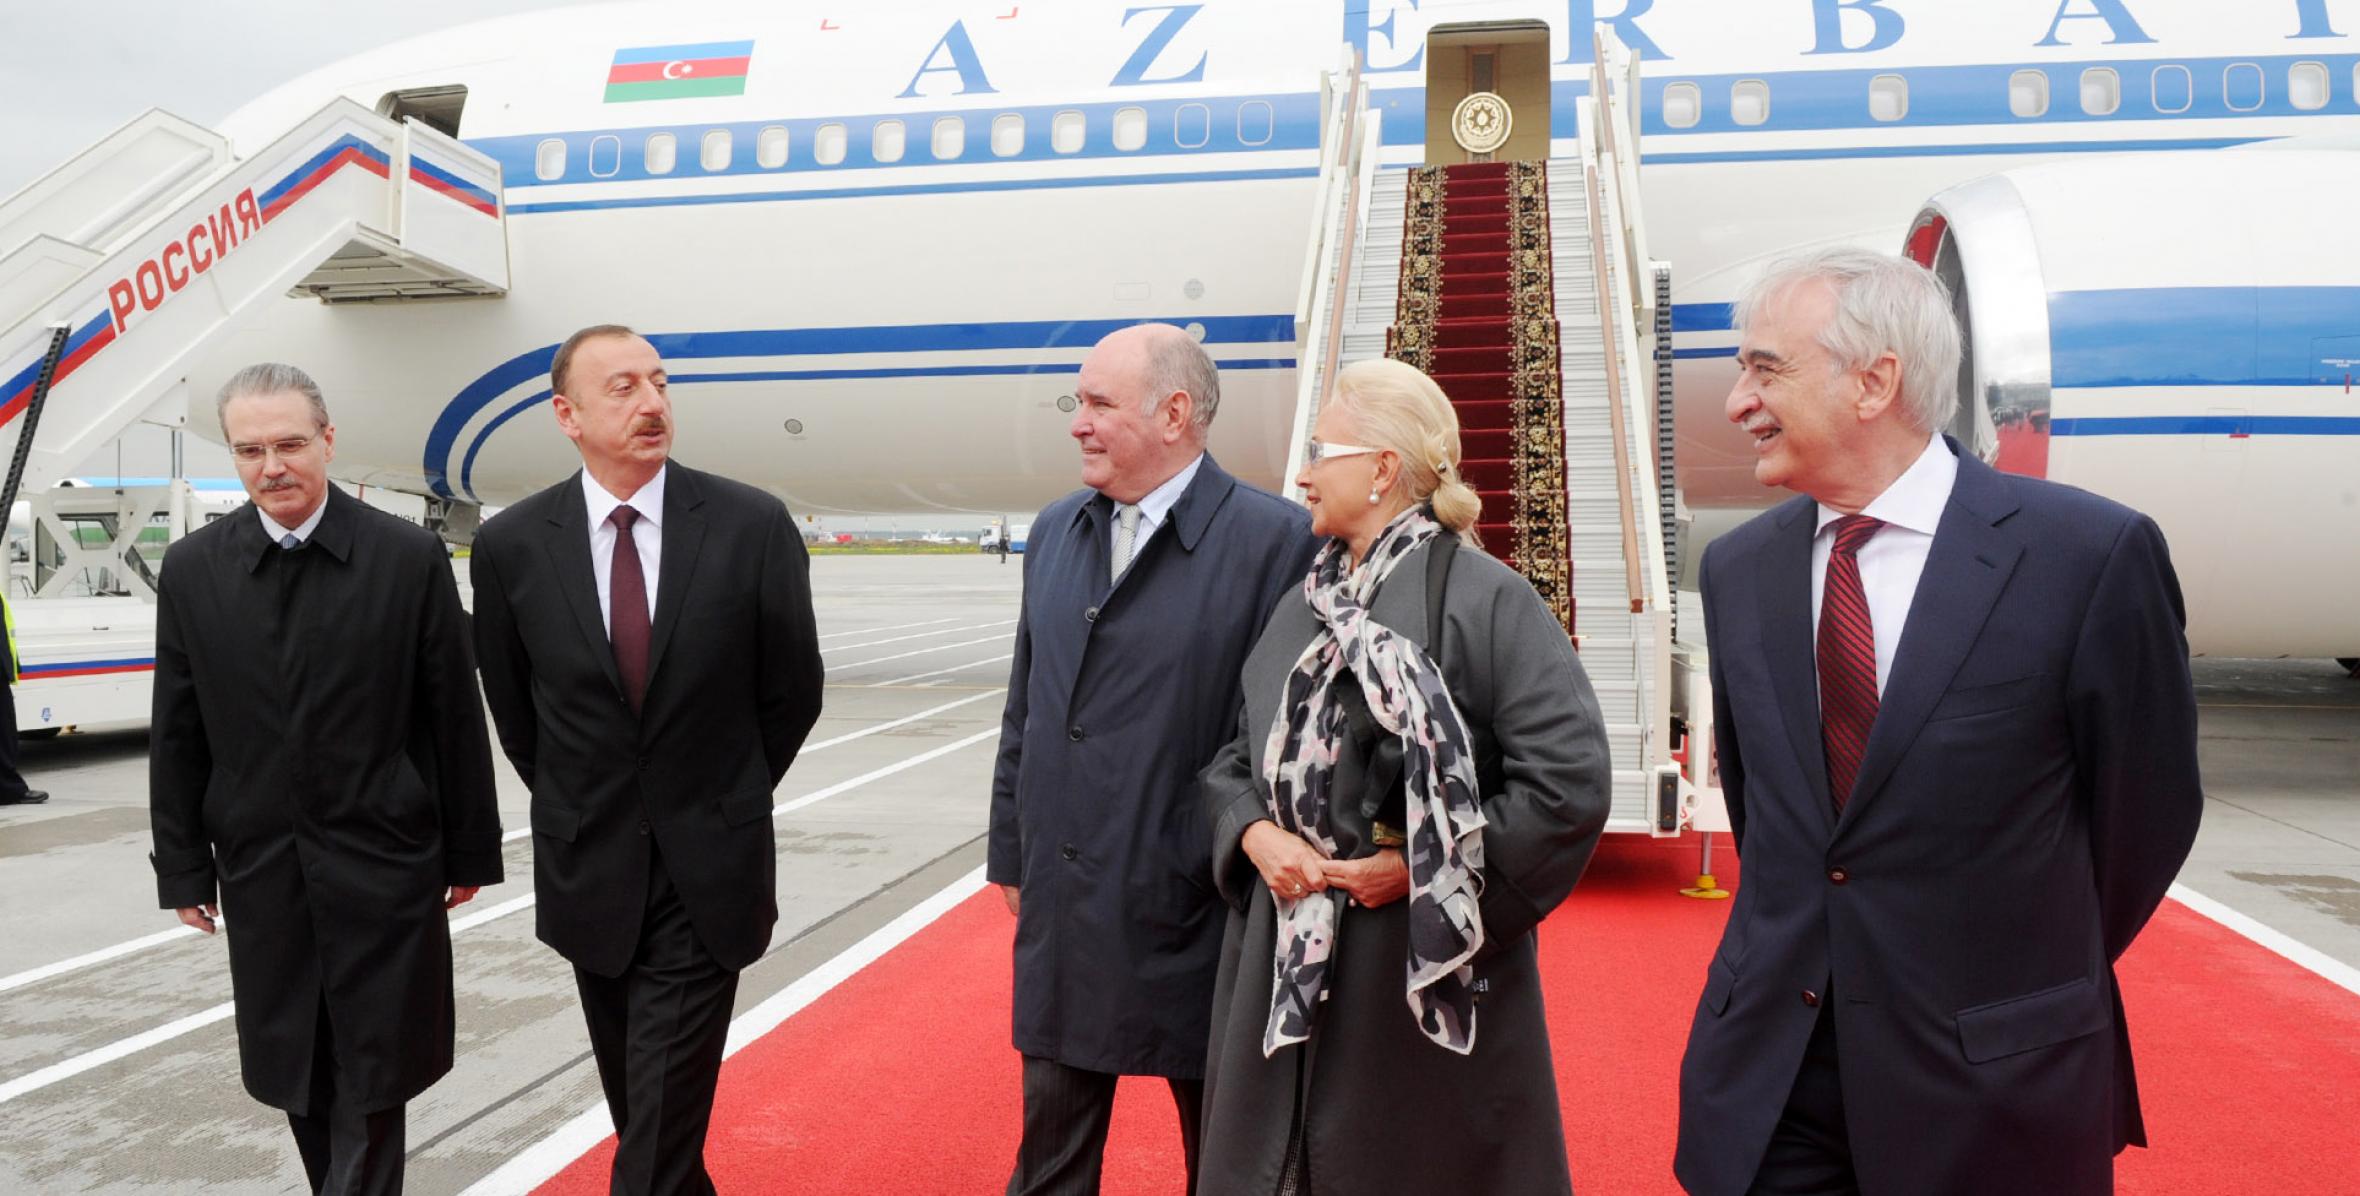 Ilham Aliyev has arrived in the Russian capital, Moscow